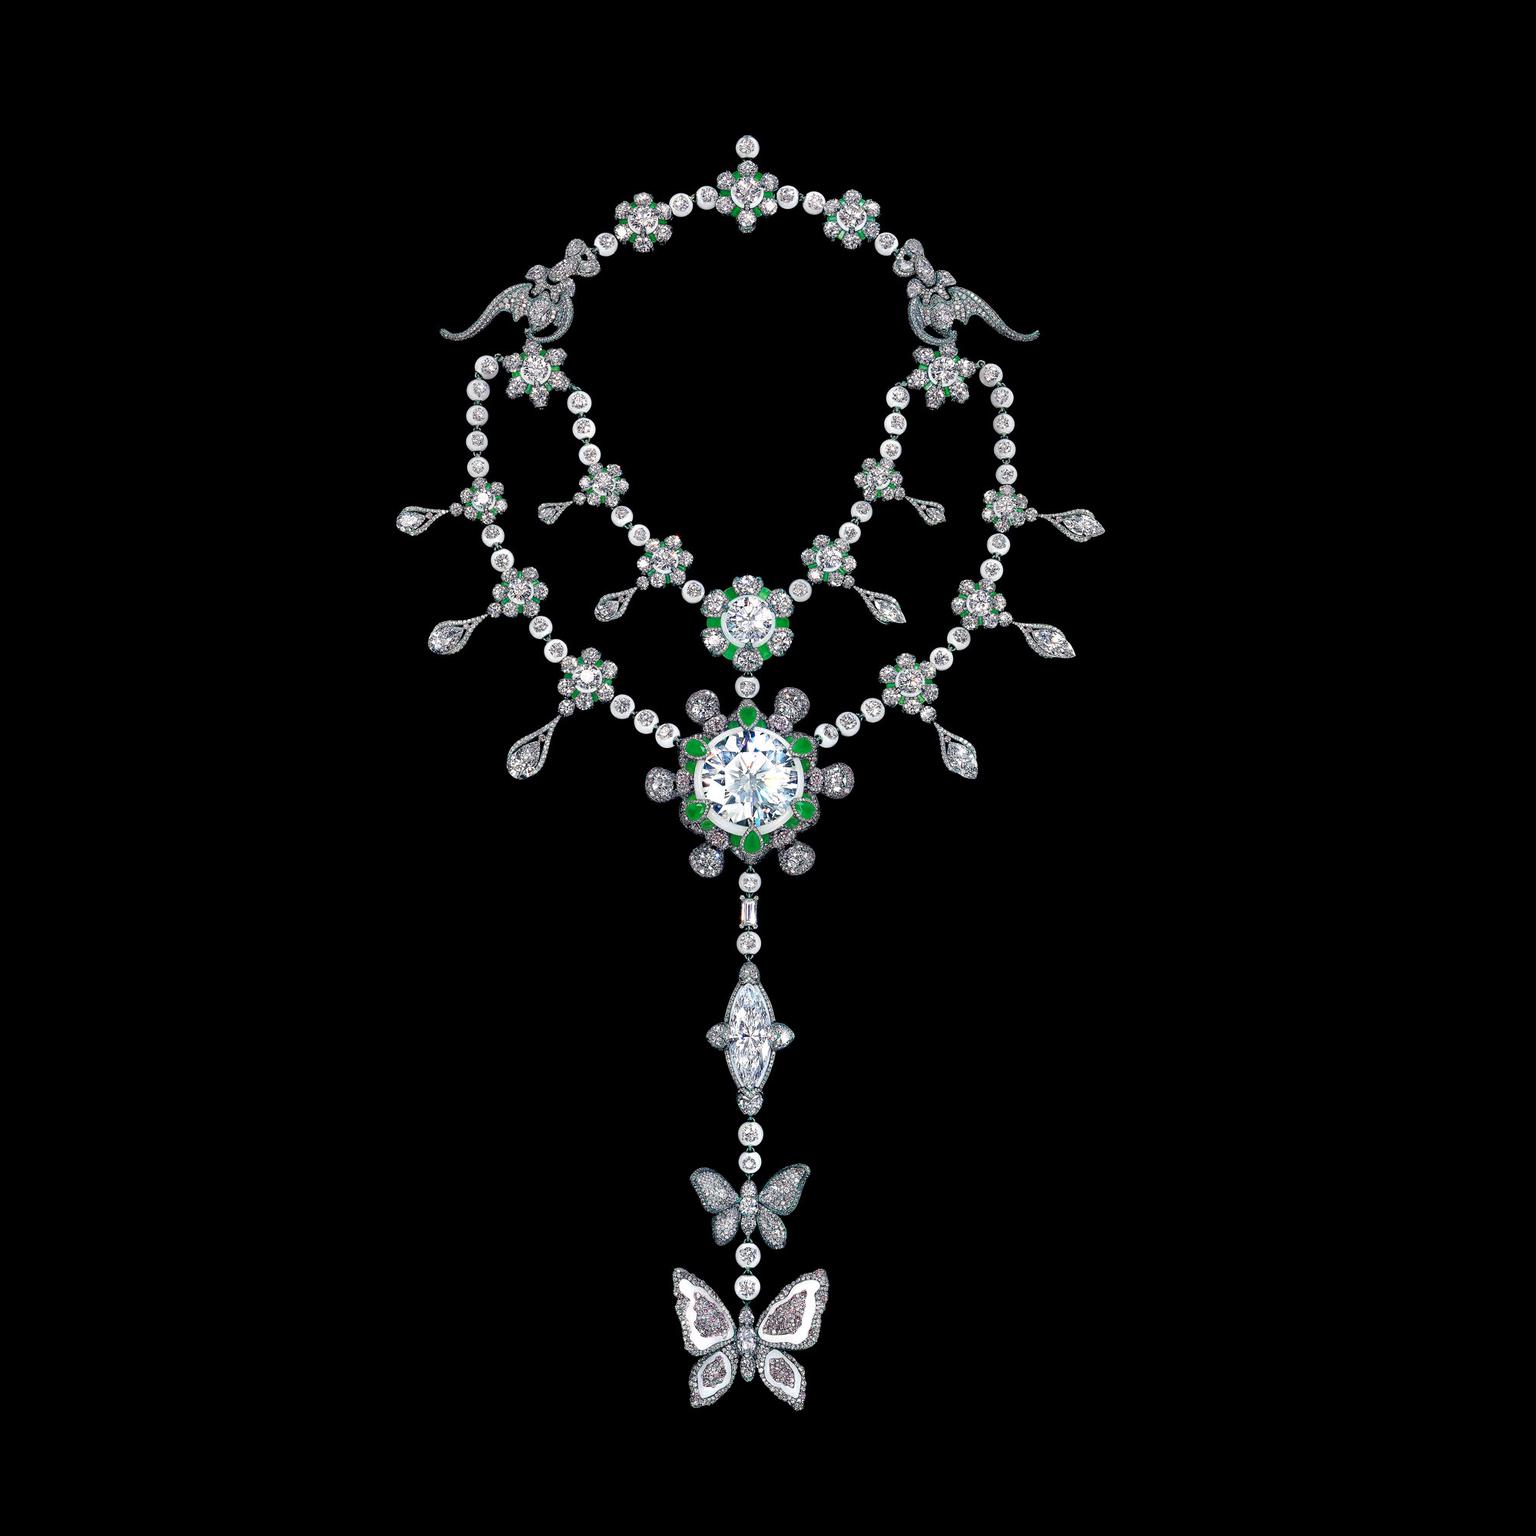 A Heritage in Bloom diamond necklace, Wallace Chan